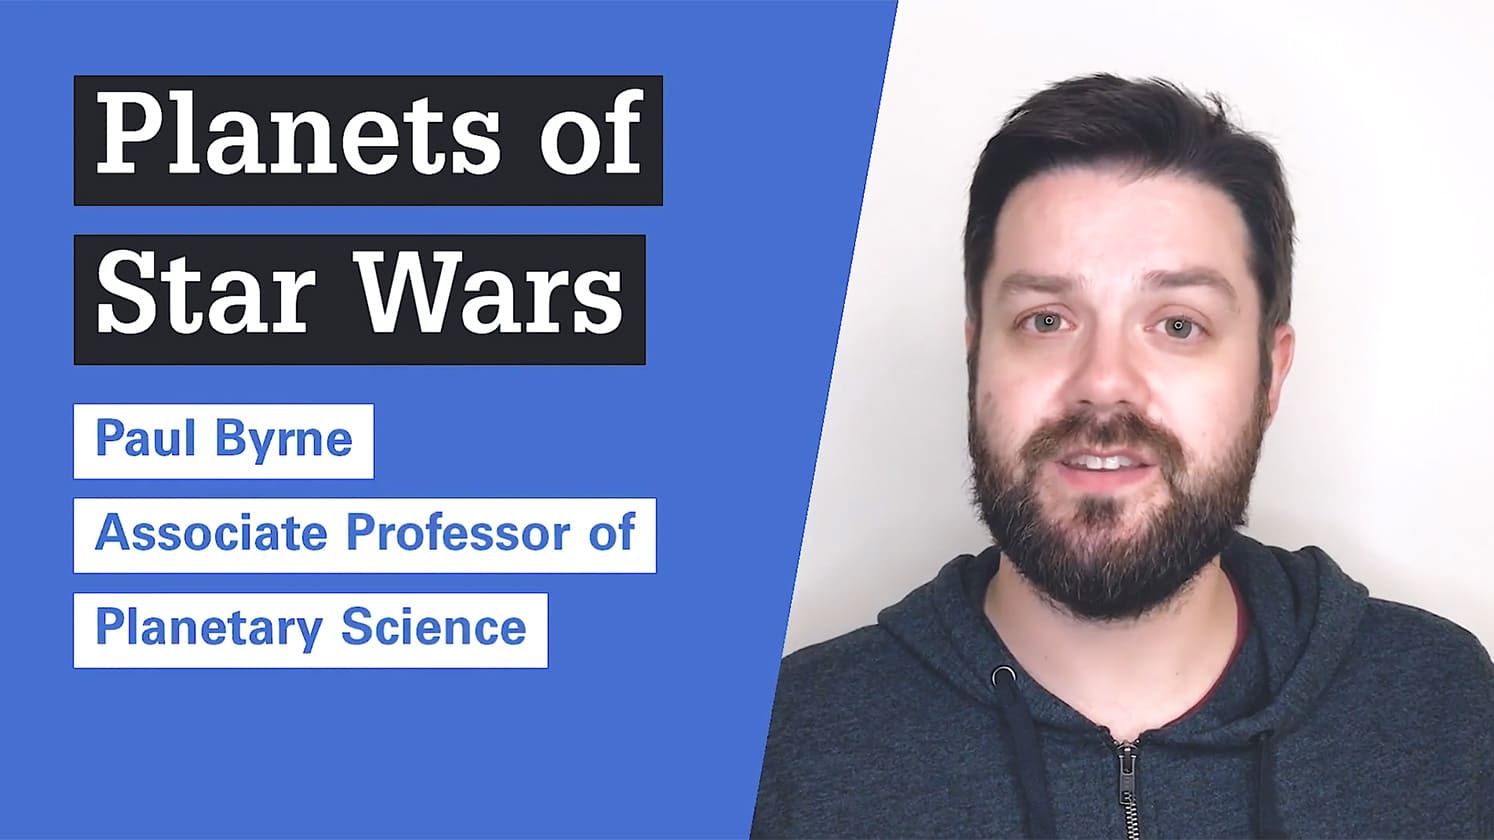 Paul Byrne, associate professor of planetary science, talks about planets of Star Wars